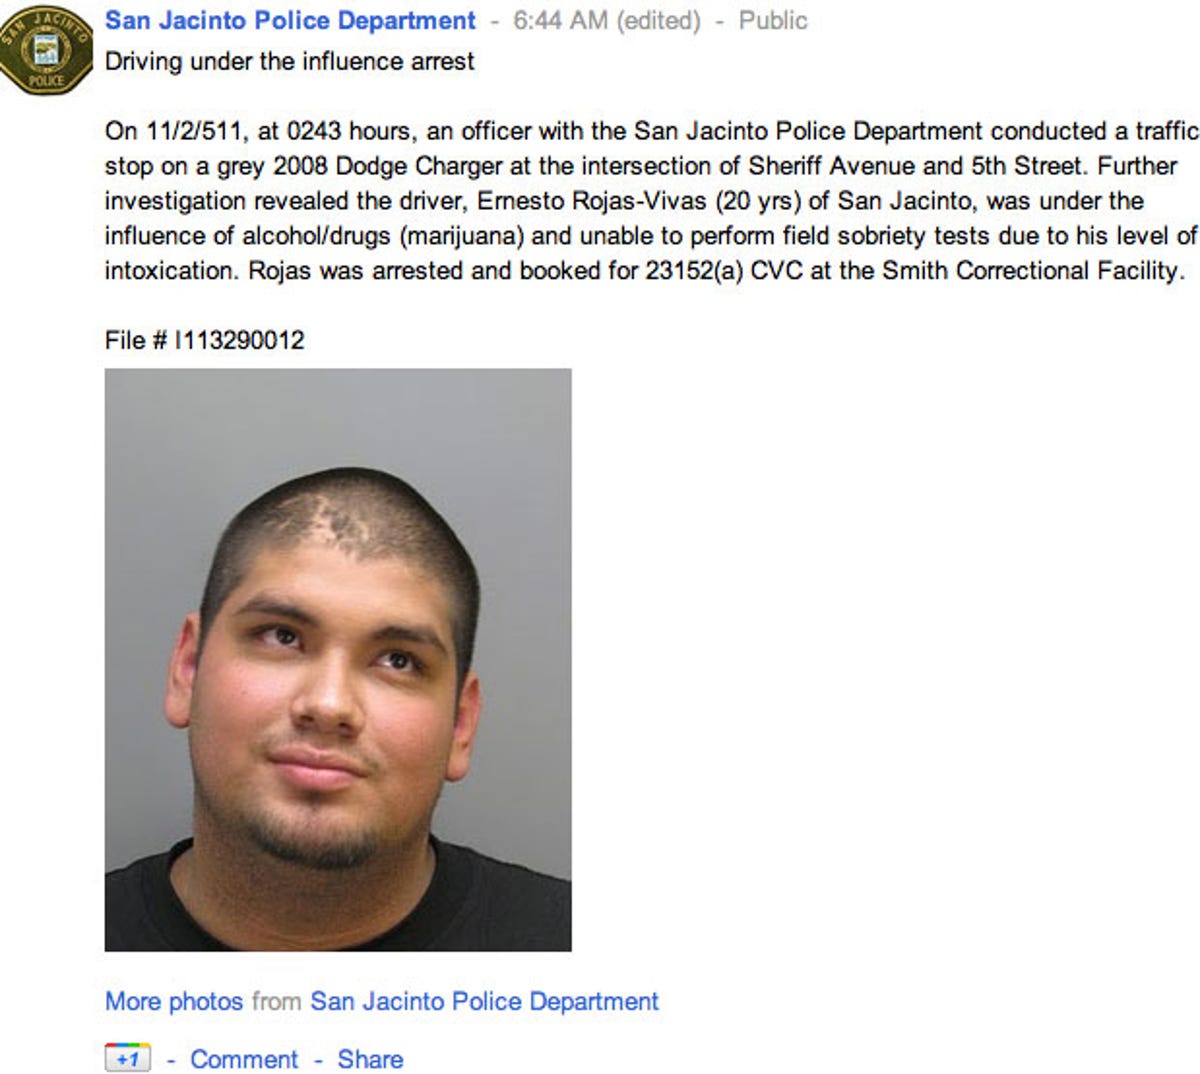 The San Jacinto, Calif., Police Department posts news of arrests on its Google+ page. Shown here is Ernesto Rojas-Vivas, along with the police account of his arrest.